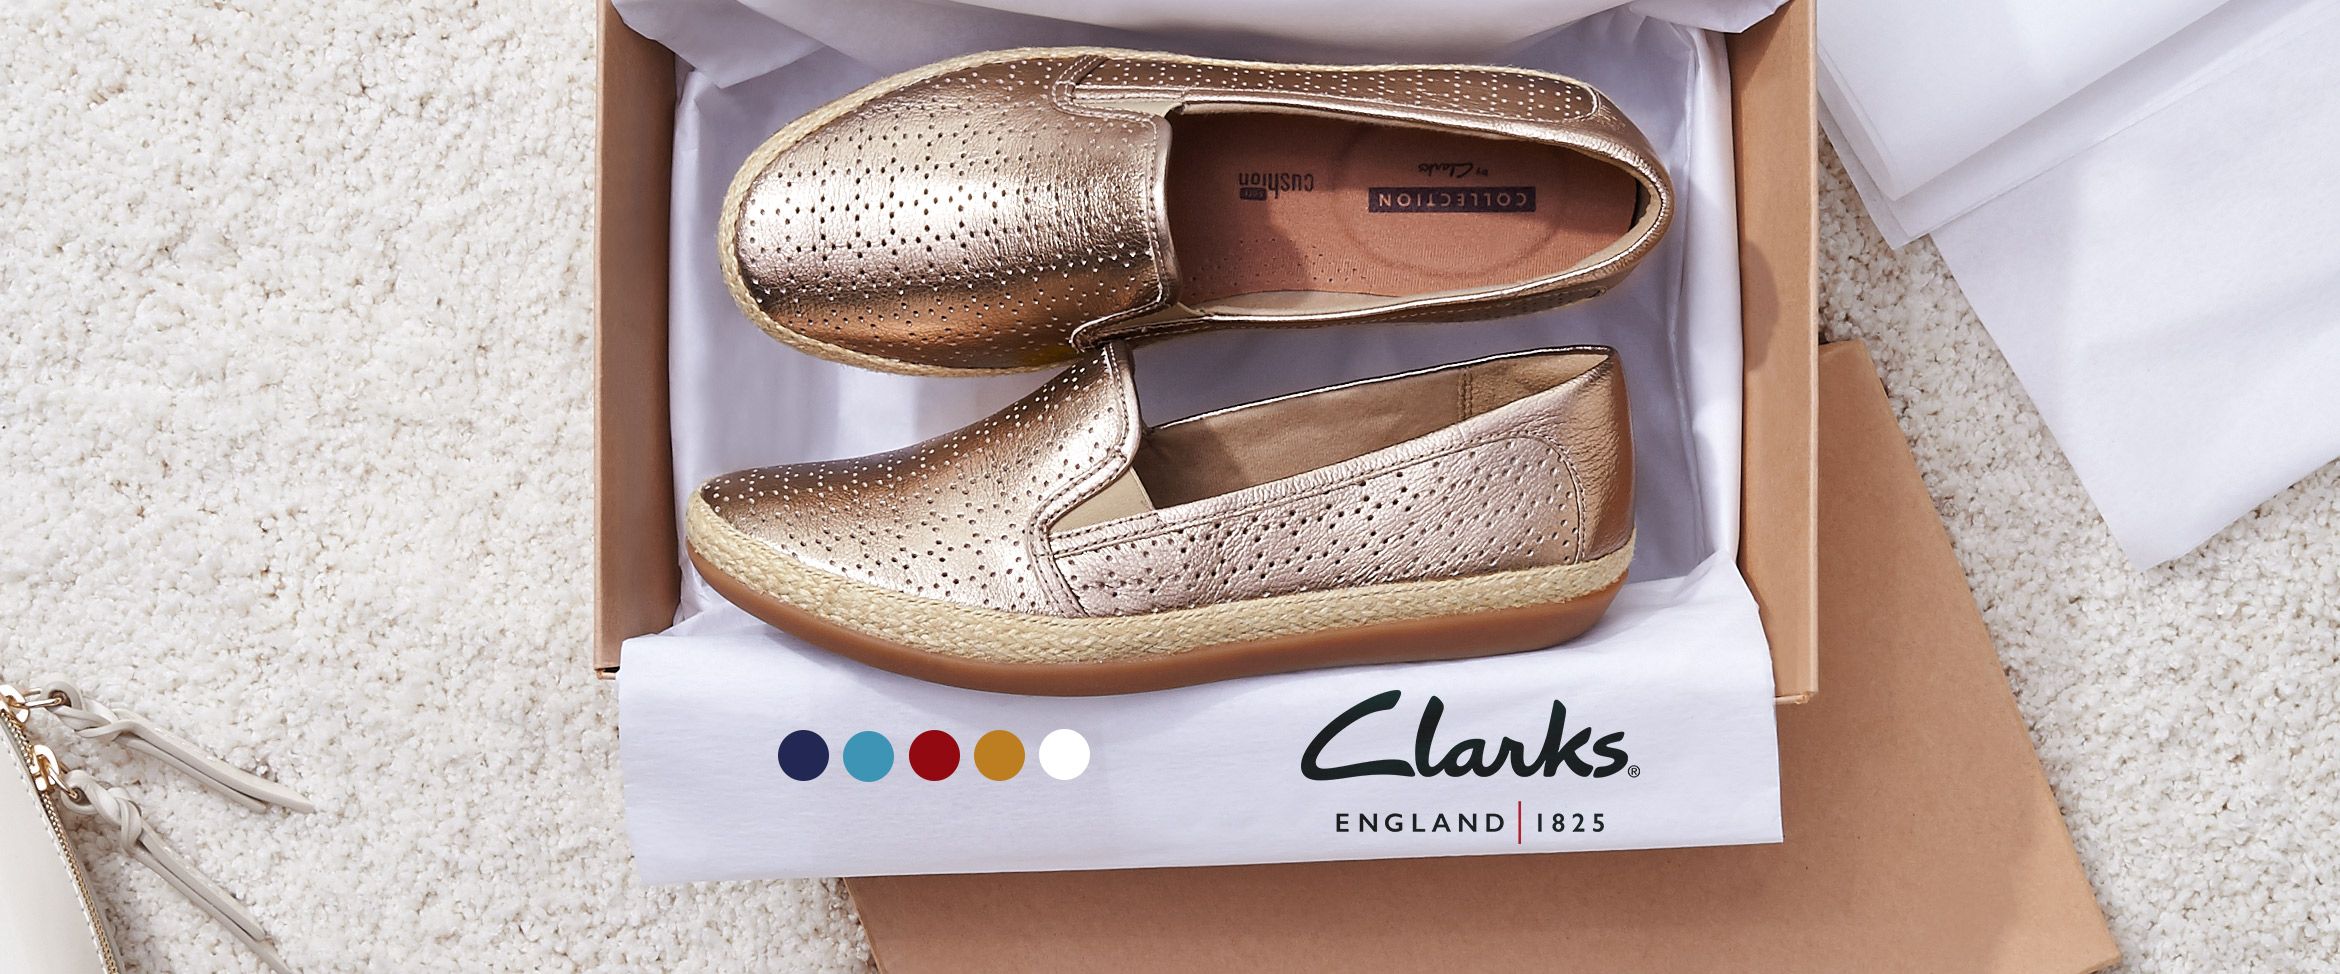 qvc clarks shoes today